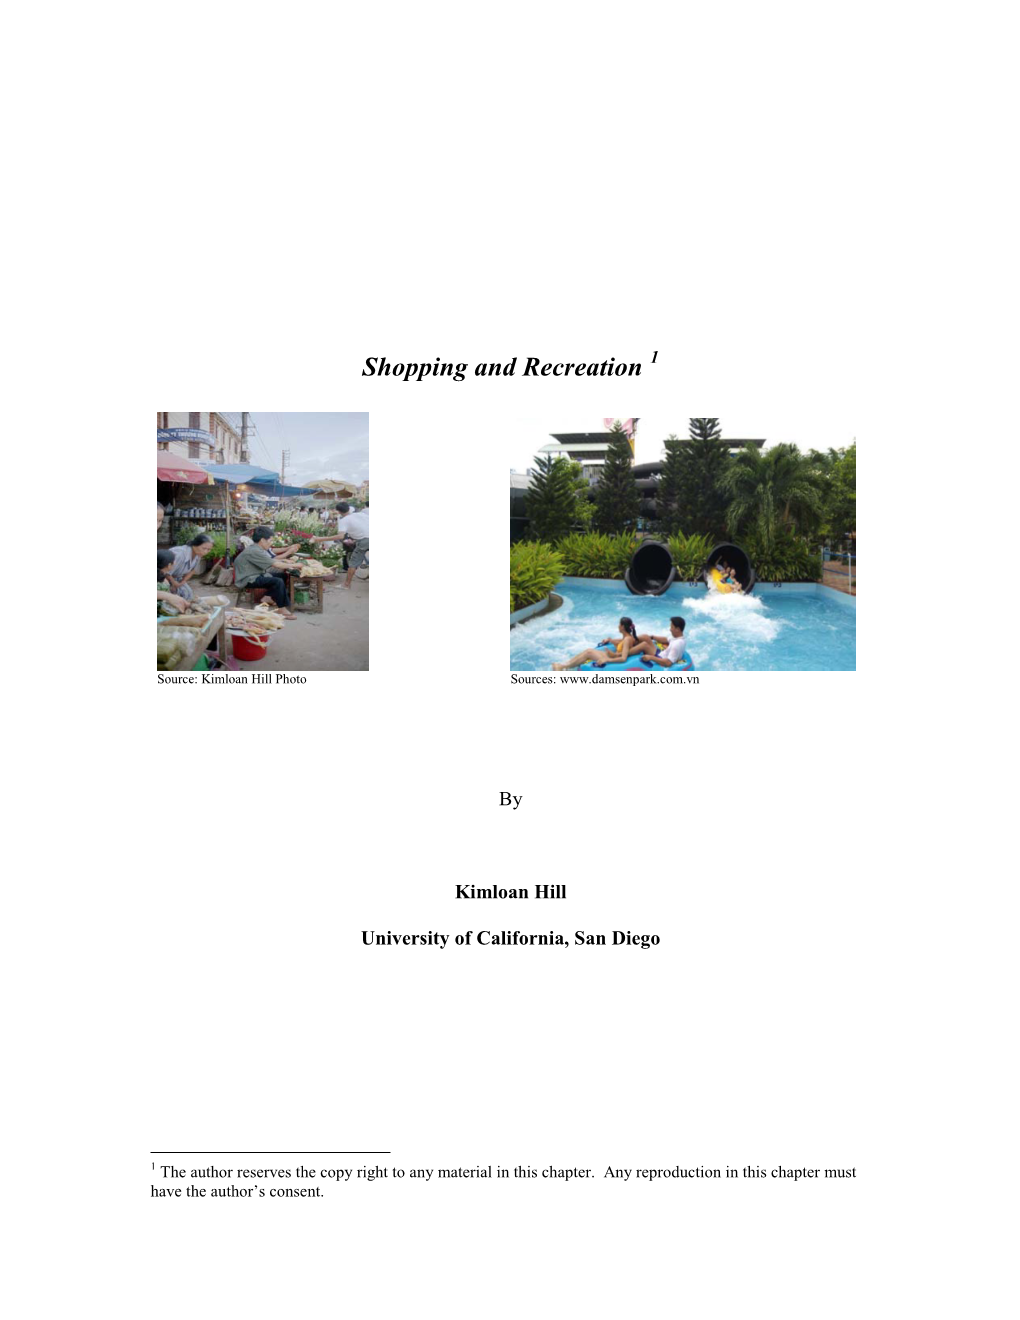 Chapter : Shopping and Recreation